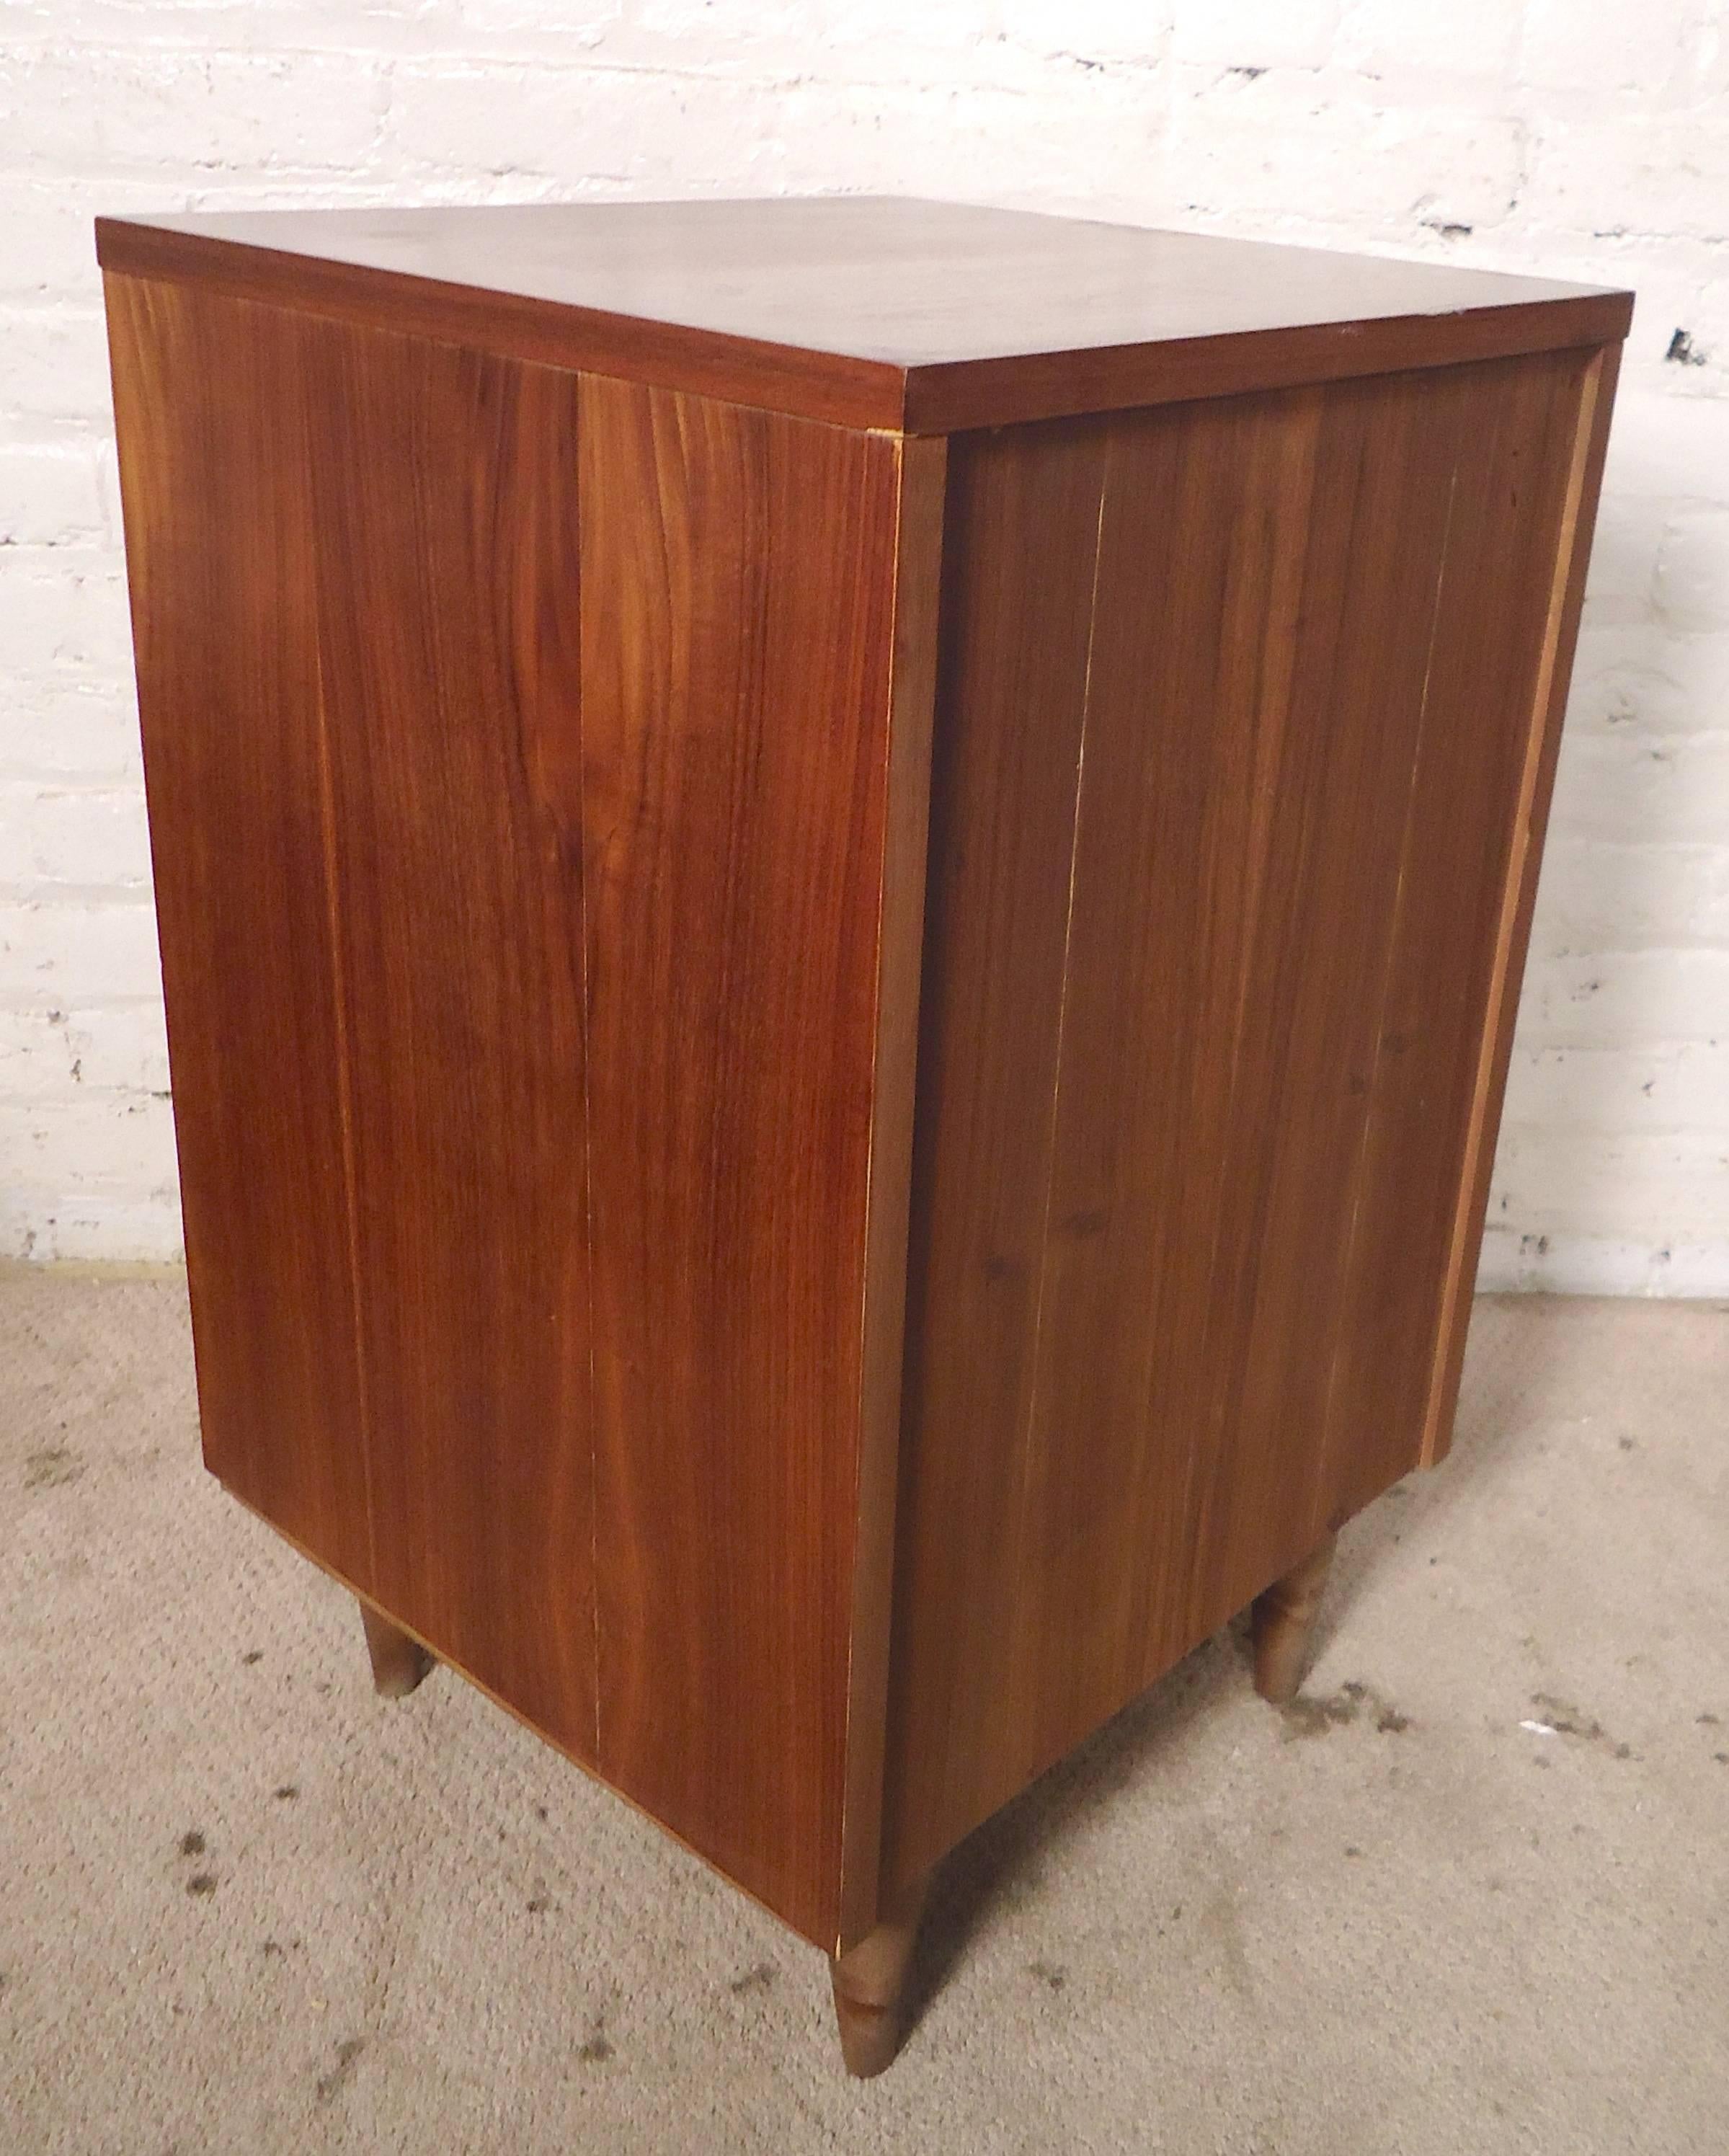 Unusual size cabinet with warm walnut wood grain. Tapered legs, white pulls, two drawers. Great for office or bedside storage. (Please confirm item location - NY or NJ - with dealer.)